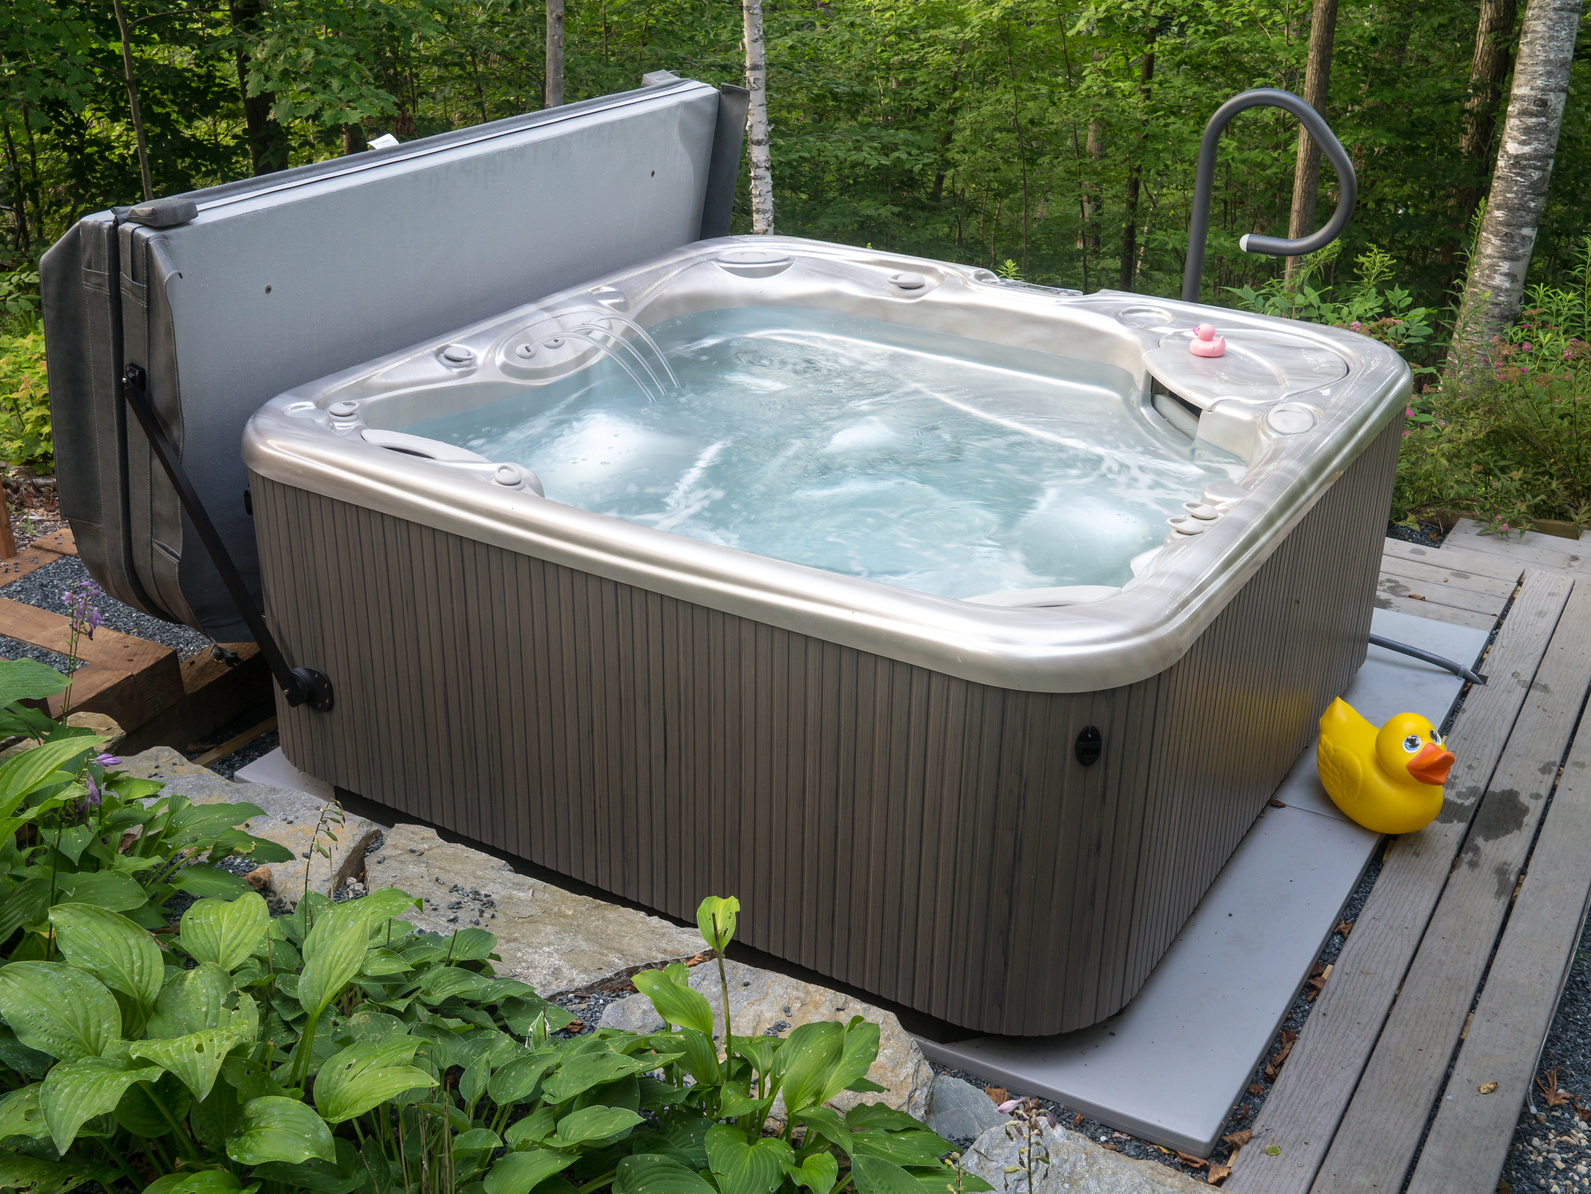 Don’t Buy A Used Hot Tub Until You Read This!